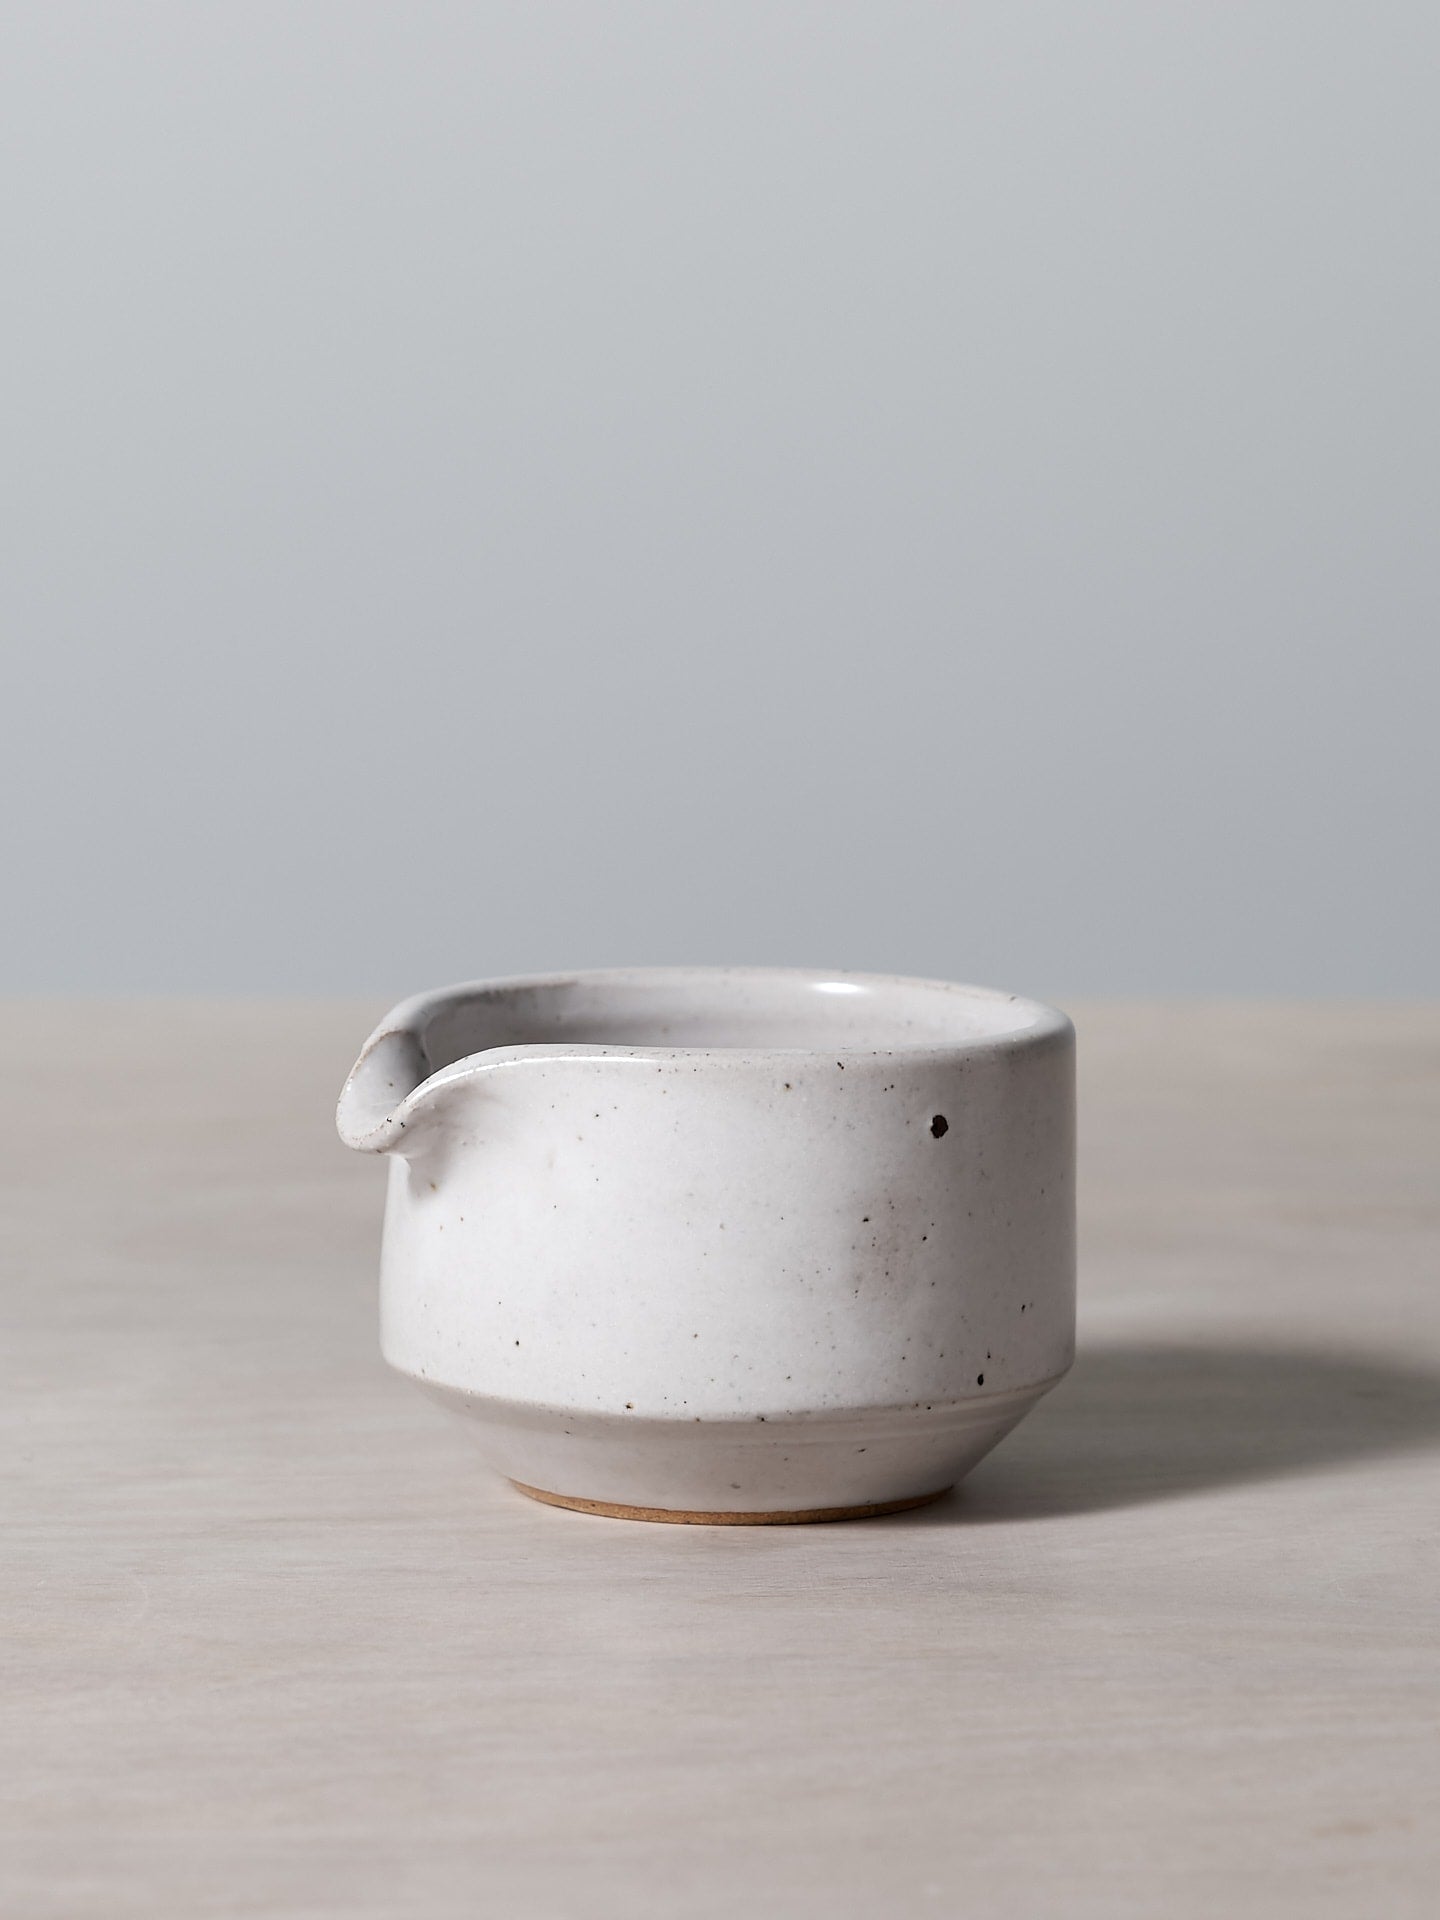 A small white Richard Beauchamp Straight Sided Creamer sitting on a wooden table.